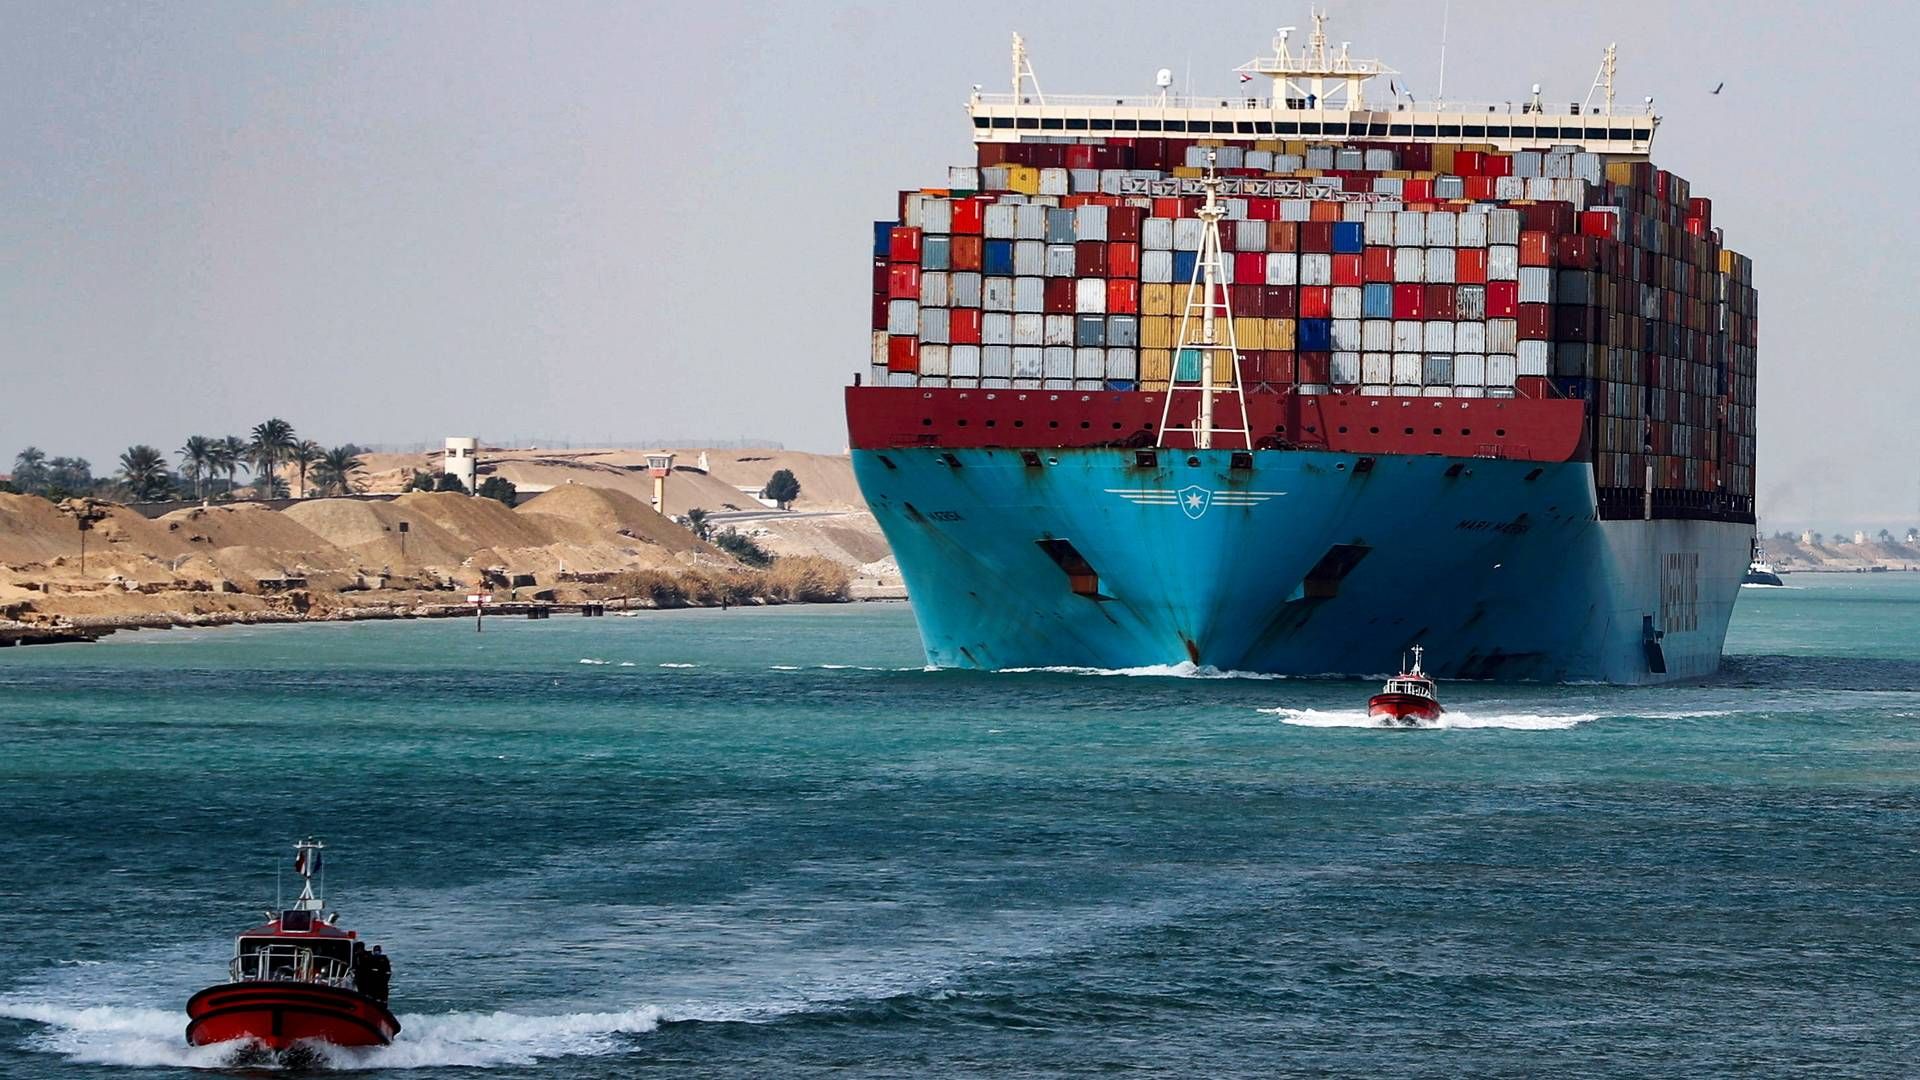 Maersk and Hapag-Lloyd will not proceed through the Suez Canal until the US-led coalition can ensure complete security, the two shipping companies tell ShippingWatch. | Photo: Mohamed Abd El Ghany/Reuters/Ritzau Scanpix